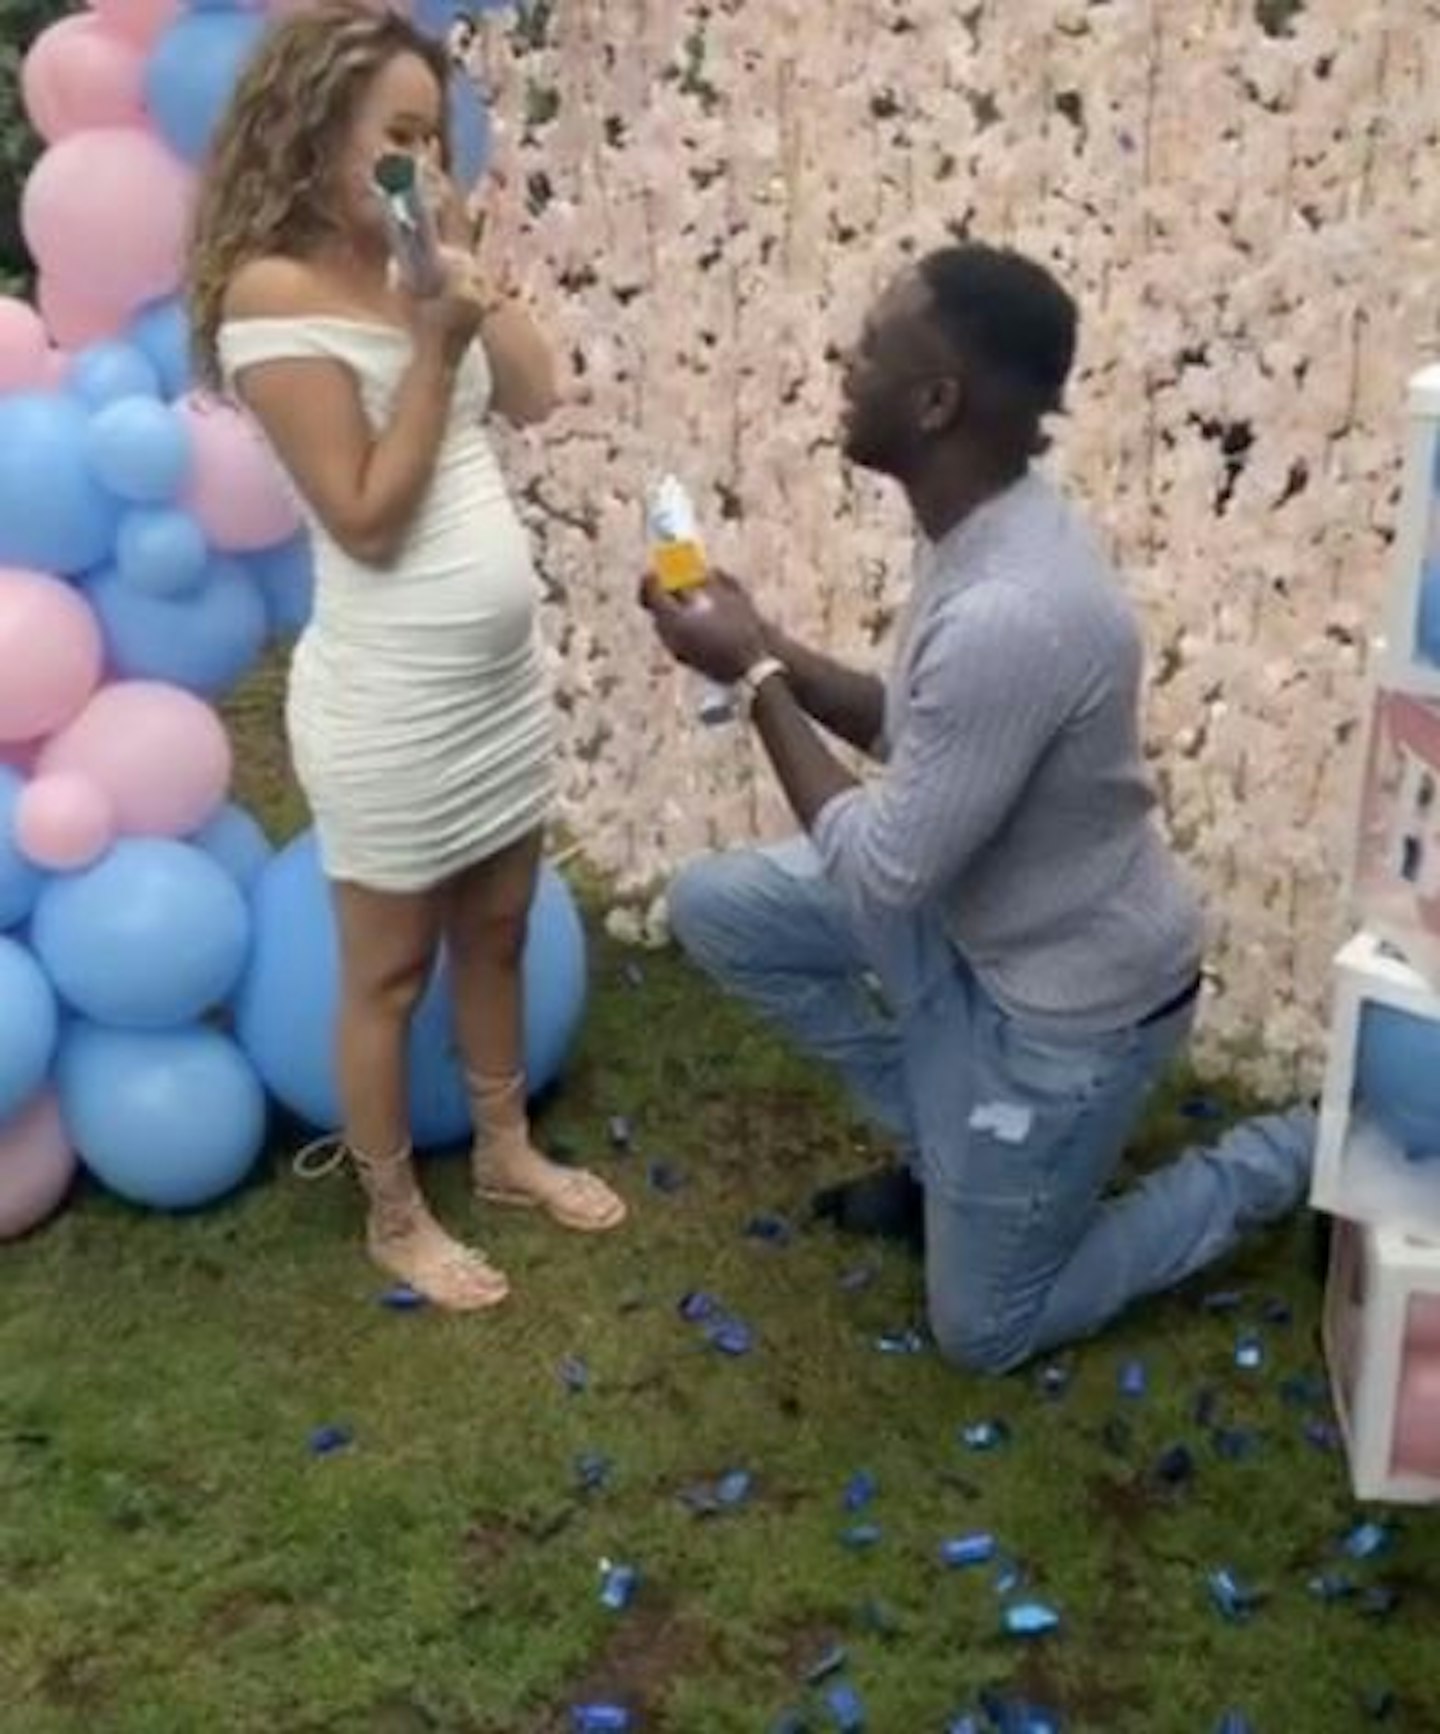 Marcel Somerville proposes to his girlfriend Rebecca Viera